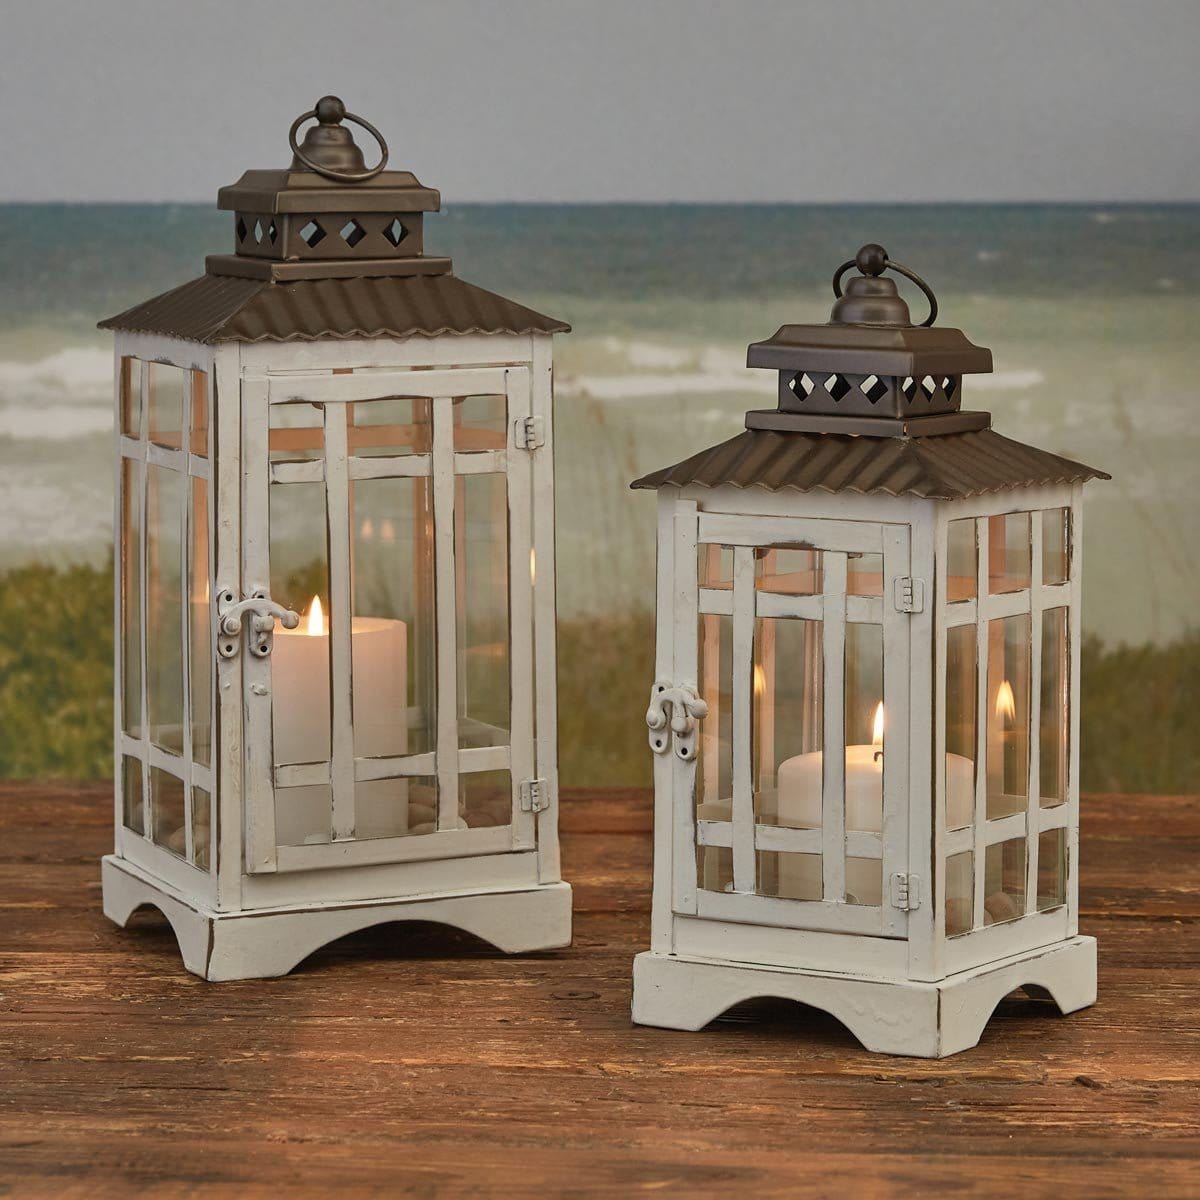 Distressed - Small White Lantern Candle Holder For Pillar Candles-Park Designs-The Village Merchant